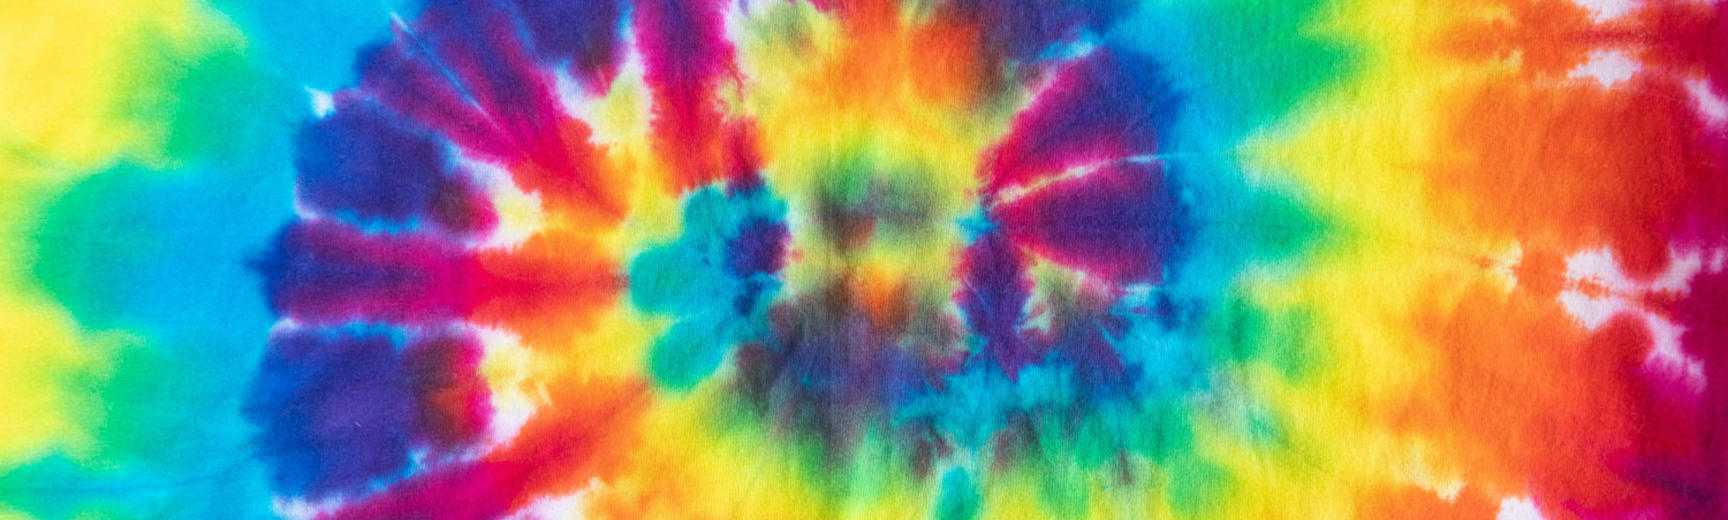 colorful tie dye pattern background